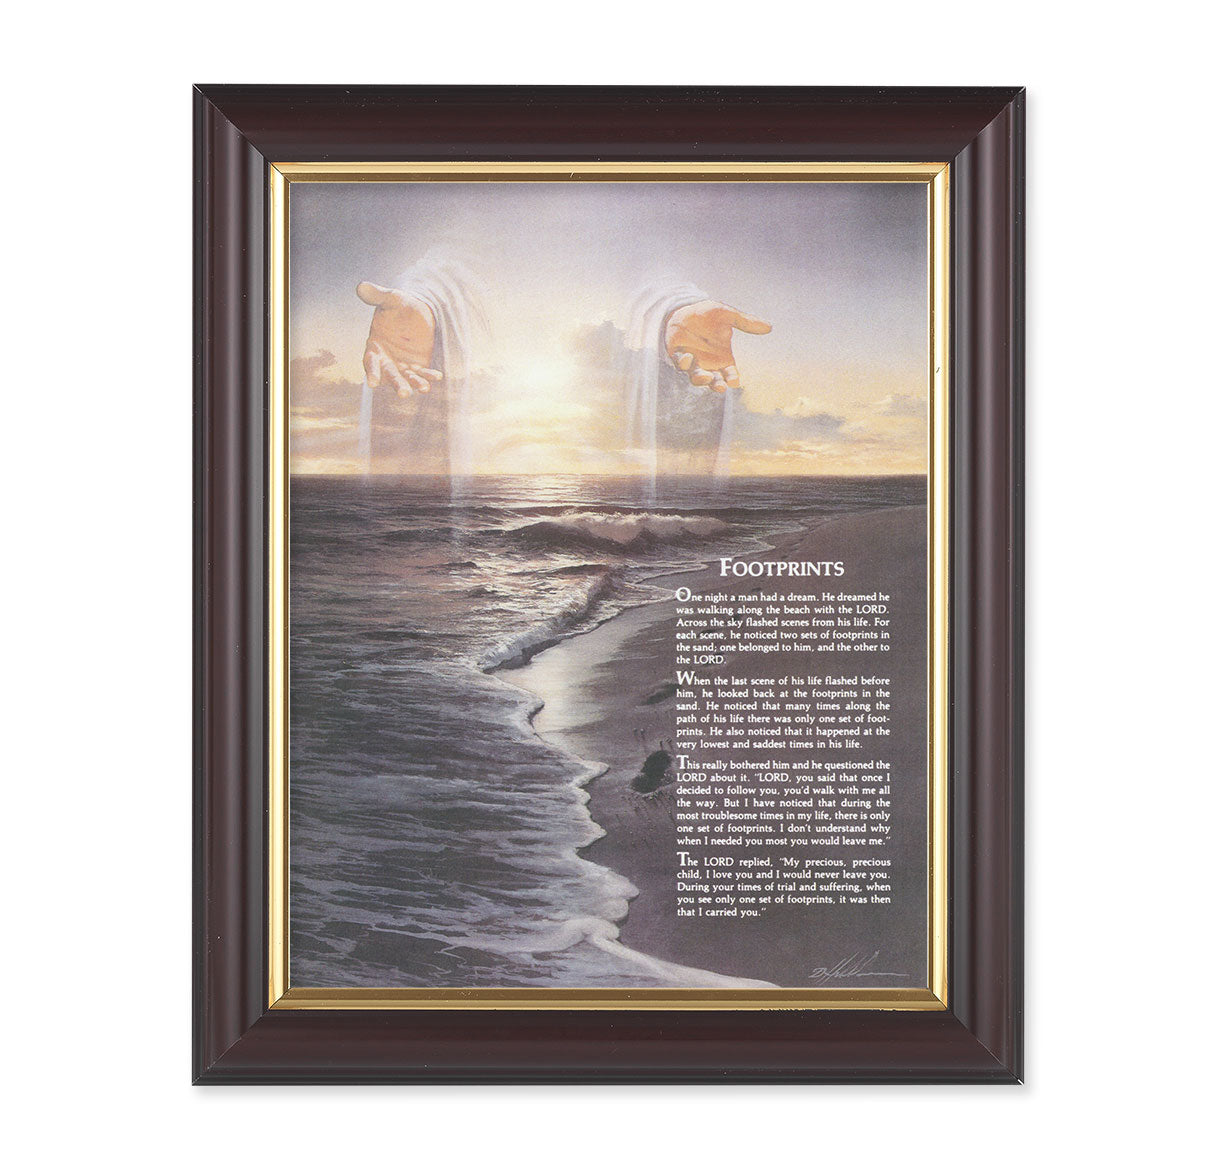 Footprints Picture Framed Wall Art Decor, Medium, Classic Fluted Dark Walnut Finished Frame with Gold-Leaf Lip